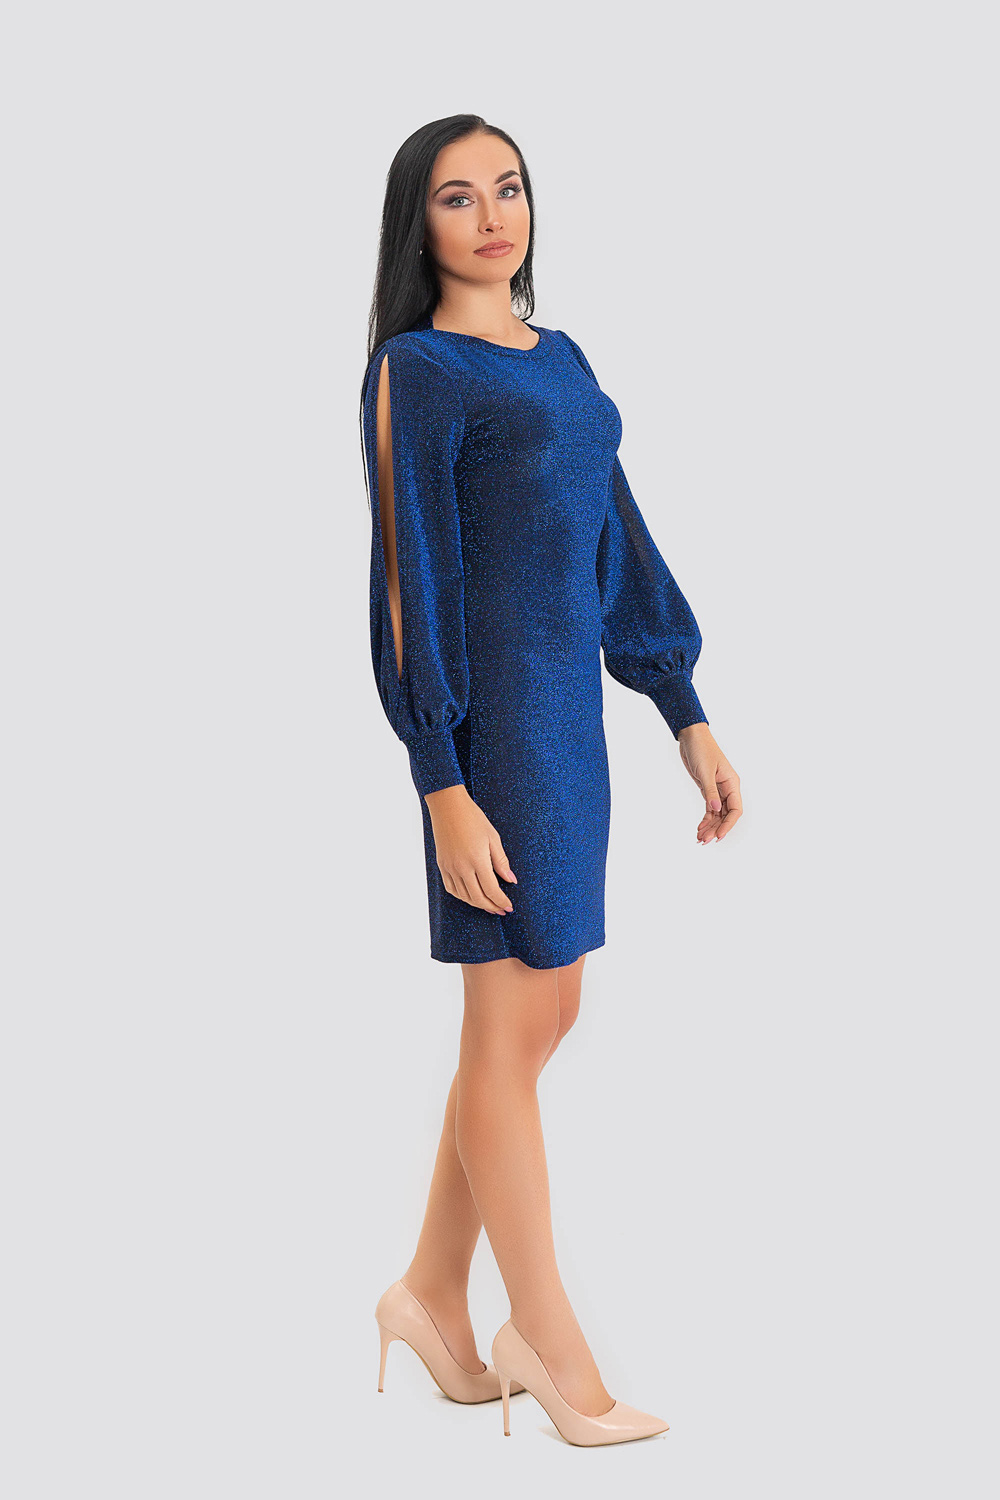 Blue dress with slit sleeves